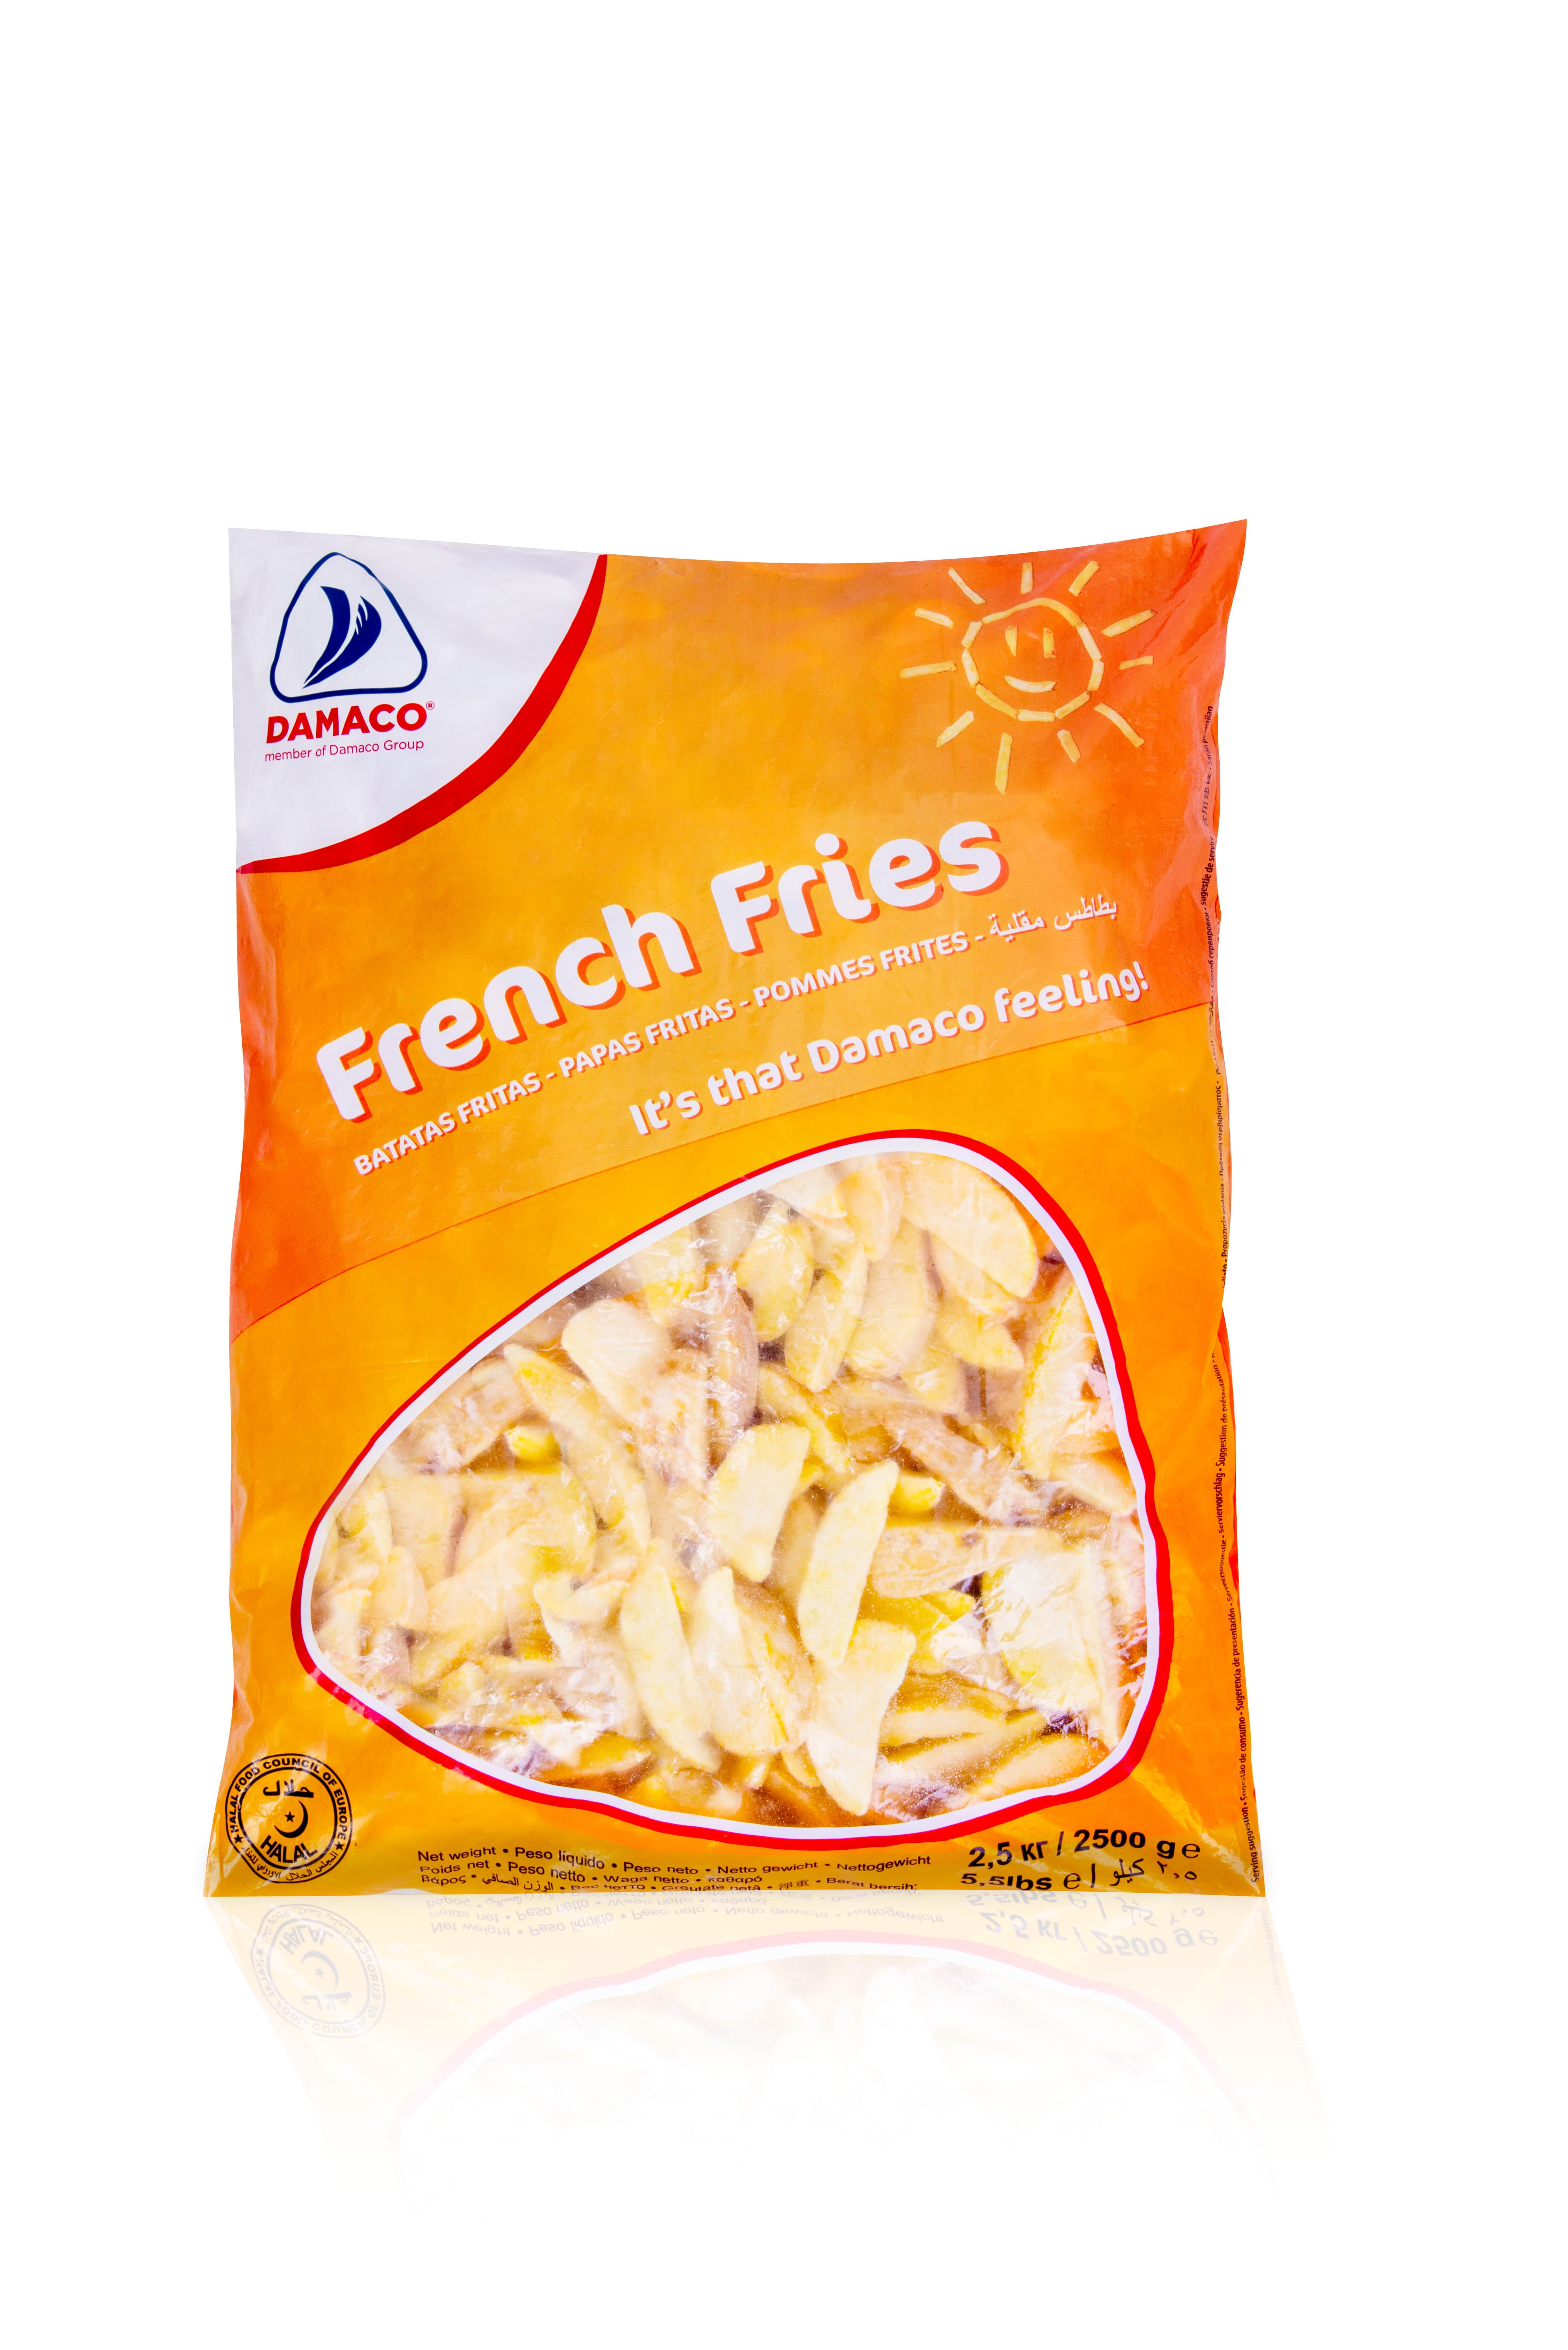 Steakhouse cut french fries packaging Damaco +/- 1-2.5kg Polybags Poids Variable Emballage Damaco 